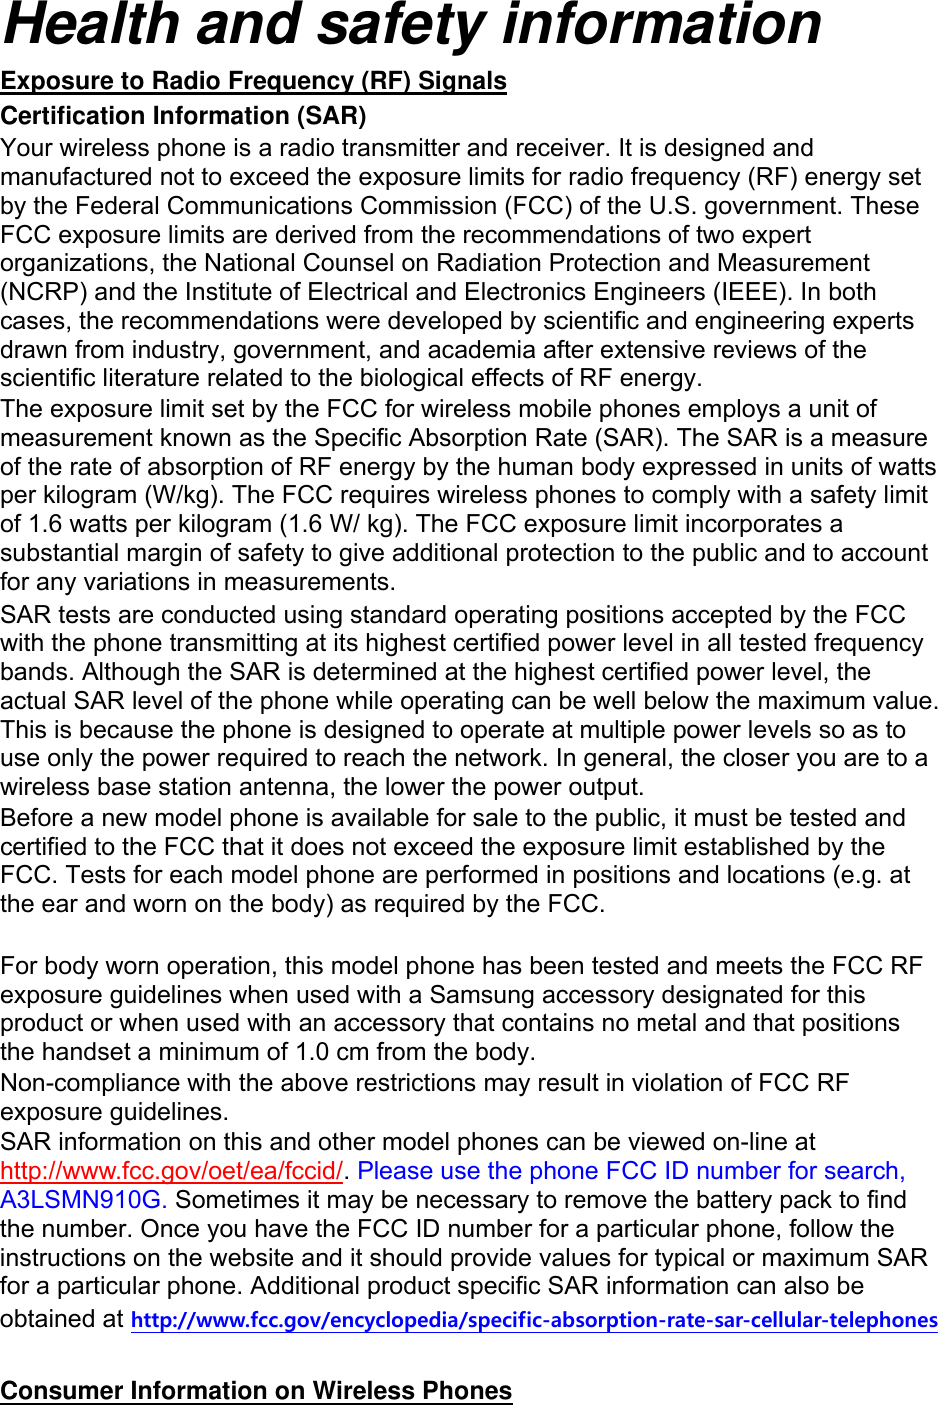 Health and safety information Exposure to Radio Frequency (RF) Signals Certification Information (SAR) Your wireless phone is a radio transmitter and receiver. It is designed and manufactured not to exceed the exposure limits for radio frequency (RF) energy set by the Federal Communications Commission (FCC) of the U.S. government. These FCC exposure limits are derived from the recommendations of two expert organizations, the National Counsel on Radiation Protection and Measurement (NCRP) and the Institute of Electrical and Electronics Engineers (IEEE). In both cases, the recommendations were developed by scientific and engineering experts drawn from industry, government, and academia after extensive reviews of the scientific literature related to the biological effects of RF energy. The exposure limit set by the FCC for wireless mobile phones employs a unit of measurement known as the Specific Absorption Rate (SAR). The SAR is a measure of the rate of absorption of RF energy by the human body expressed in units of watts per kilogram (W/kg). The FCC requires wireless phones to comply with a safety limit of 1.6 watts per kilogram (1.6 W/ kg). The FCC exposure limit incorporates a substantial margin of safety to give additional protection to the public and to account for any variations in measurements. SAR tests are conducted using standard operating positions accepted by the FCC with the phone transmitting at its highest certified power level in all tested frequency bands. Although the SAR is determined at the highest certified power level, the actual SAR level of the phone while operating can be well below the maximum value. This is because the phone is designed to operate at multiple power levels so as to use only the power required to reach the network. In general, the closer you are to a wireless base station antenna, the lower the power output. Before a new model phone is available for sale to the public, it must be tested and certified to the FCC that it does not exceed the exposure limit established by the FCC. Tests for each model phone are performed in positions and locations (e.g. at the ear and worn on the body) as required by the FCC.      For body worn operation, this model phone has been tested and meets the FCC RF exposure guidelines when used with a Samsung accessory designated for this product or when used with an accessory that contains no metal and that positions the handset a minimum of 1.0 cm from the body.   Non-compliance with the above restrictions may result in violation of FCC RF exposure guidelines. SAR information on this and other model phones can be viewed on-line at http://www.fcc.gov/oet/ea/fccid/. Please use the phone FCC ID number for search, A3LSMN910G. Sometimes it may be necessary to remove the battery pack to find the number. Once you have the FCC ID number for a particular phone, follow the instructions on the website and it should provide values for typical or maximum SAR for a particular phone. Additional product specific SAR information can also be obtained at http://www.fcc.gov/encyclopedia/specific-absorption-rate-sar-cellular-telephones  Consumer Information on Wireless Phones 